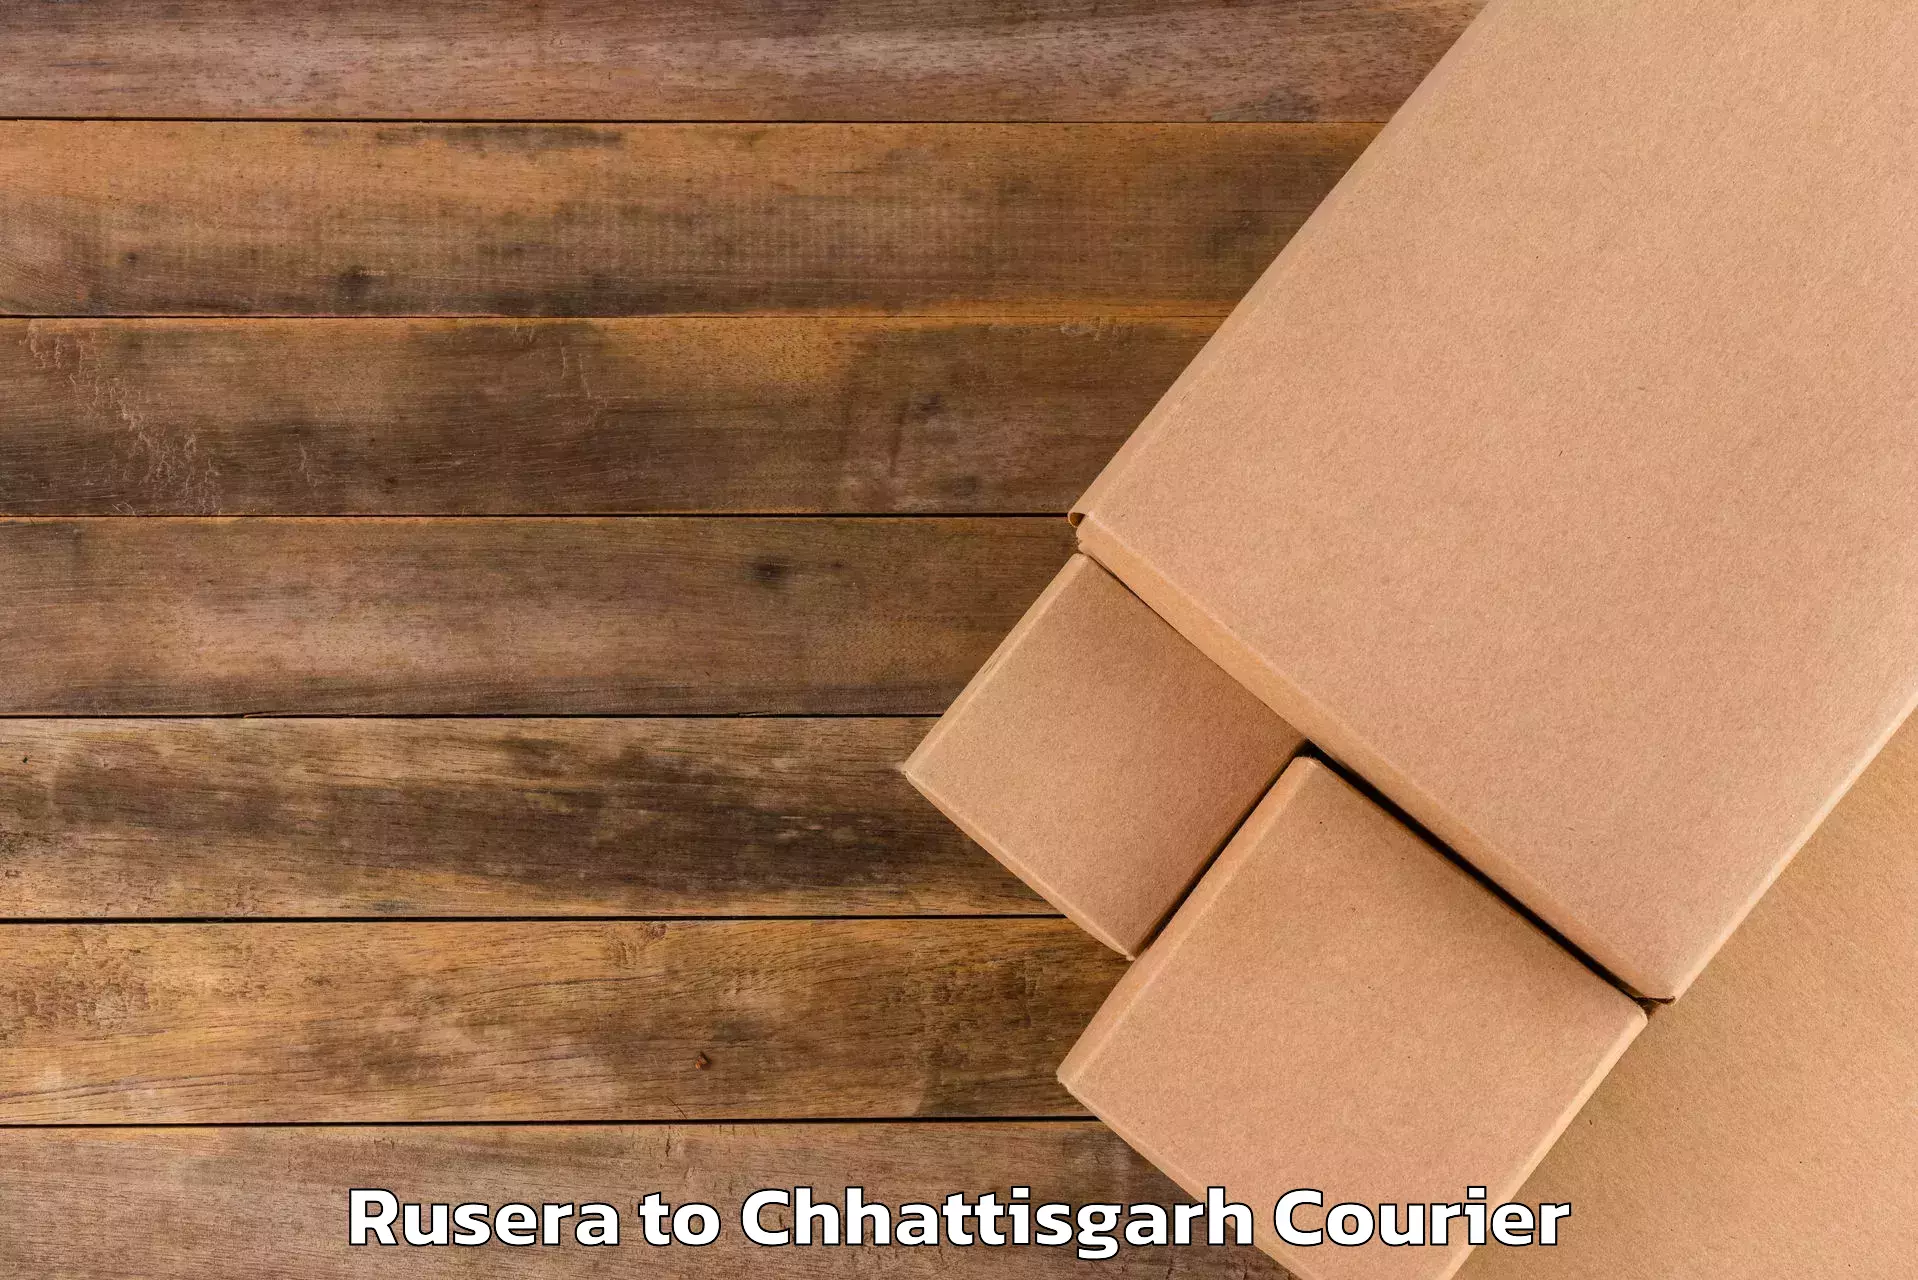 Luggage delivery app Rusera to Nagri